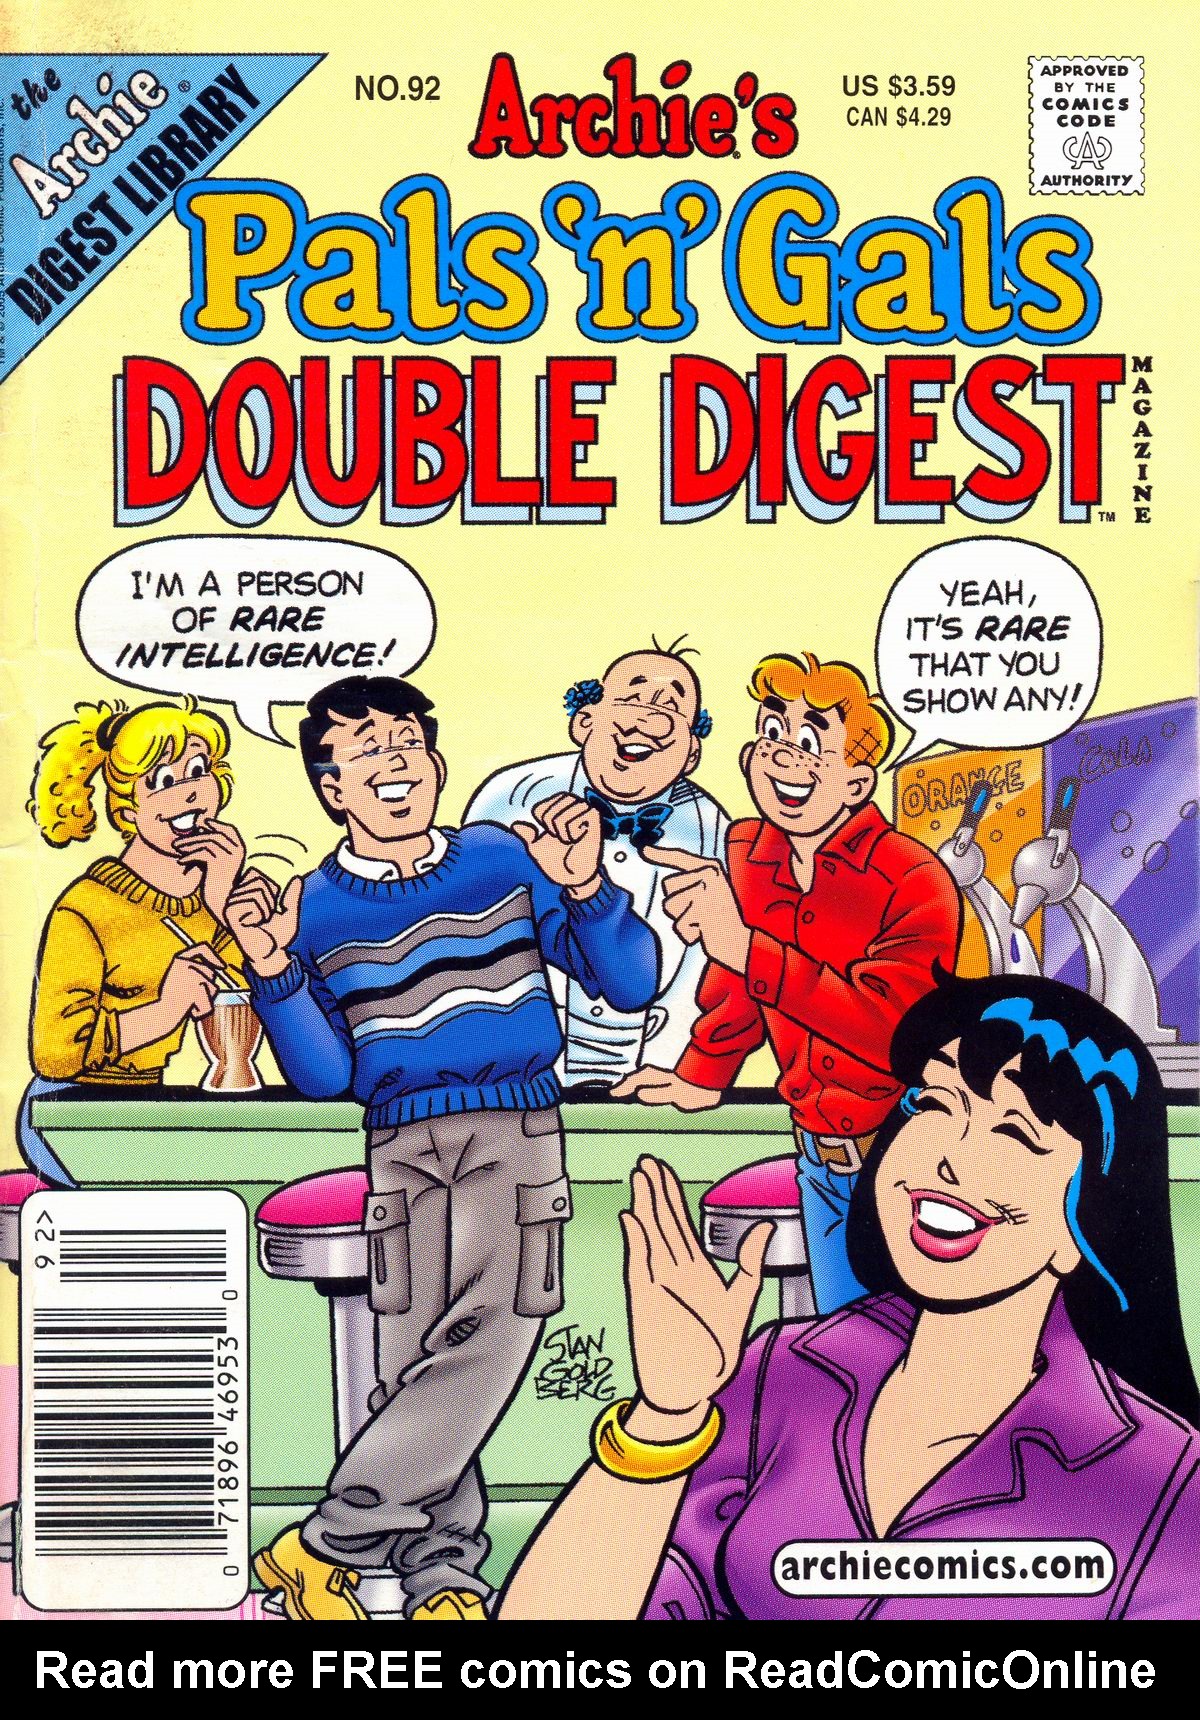 Archie's Pals 'n' Gals Double Digest Magazine issue 92 - Page 1